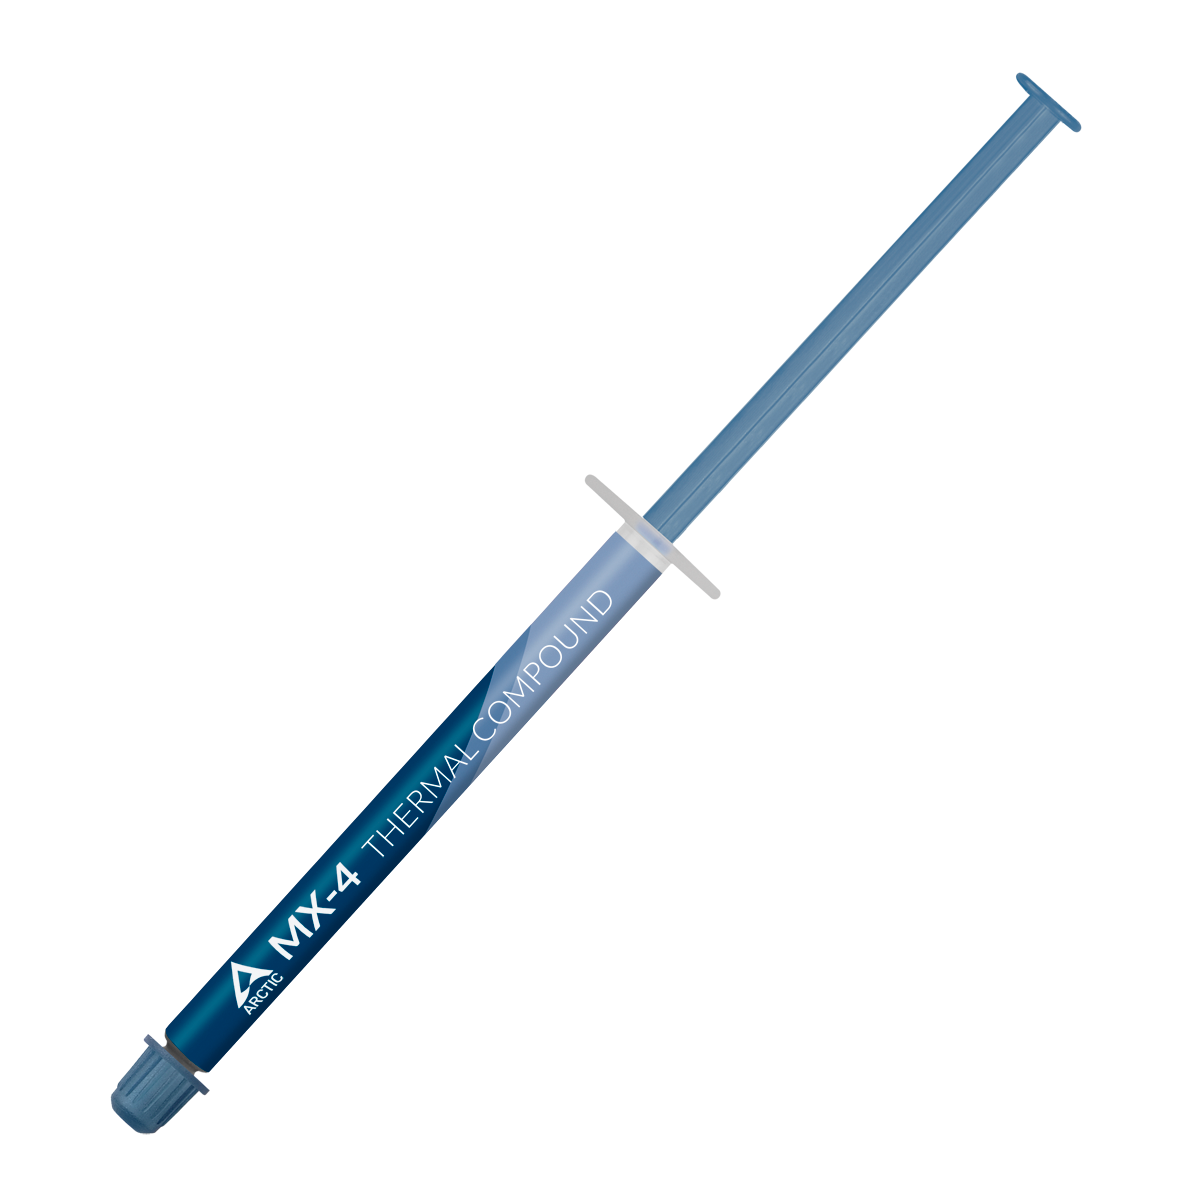 ARCTIC MX-4 (incl. Spatula, 4 g) - Premium Performance Thermal Paste for  all processors (CPU, GPU - PC, PS4, XBOX), very high thermal conductivity